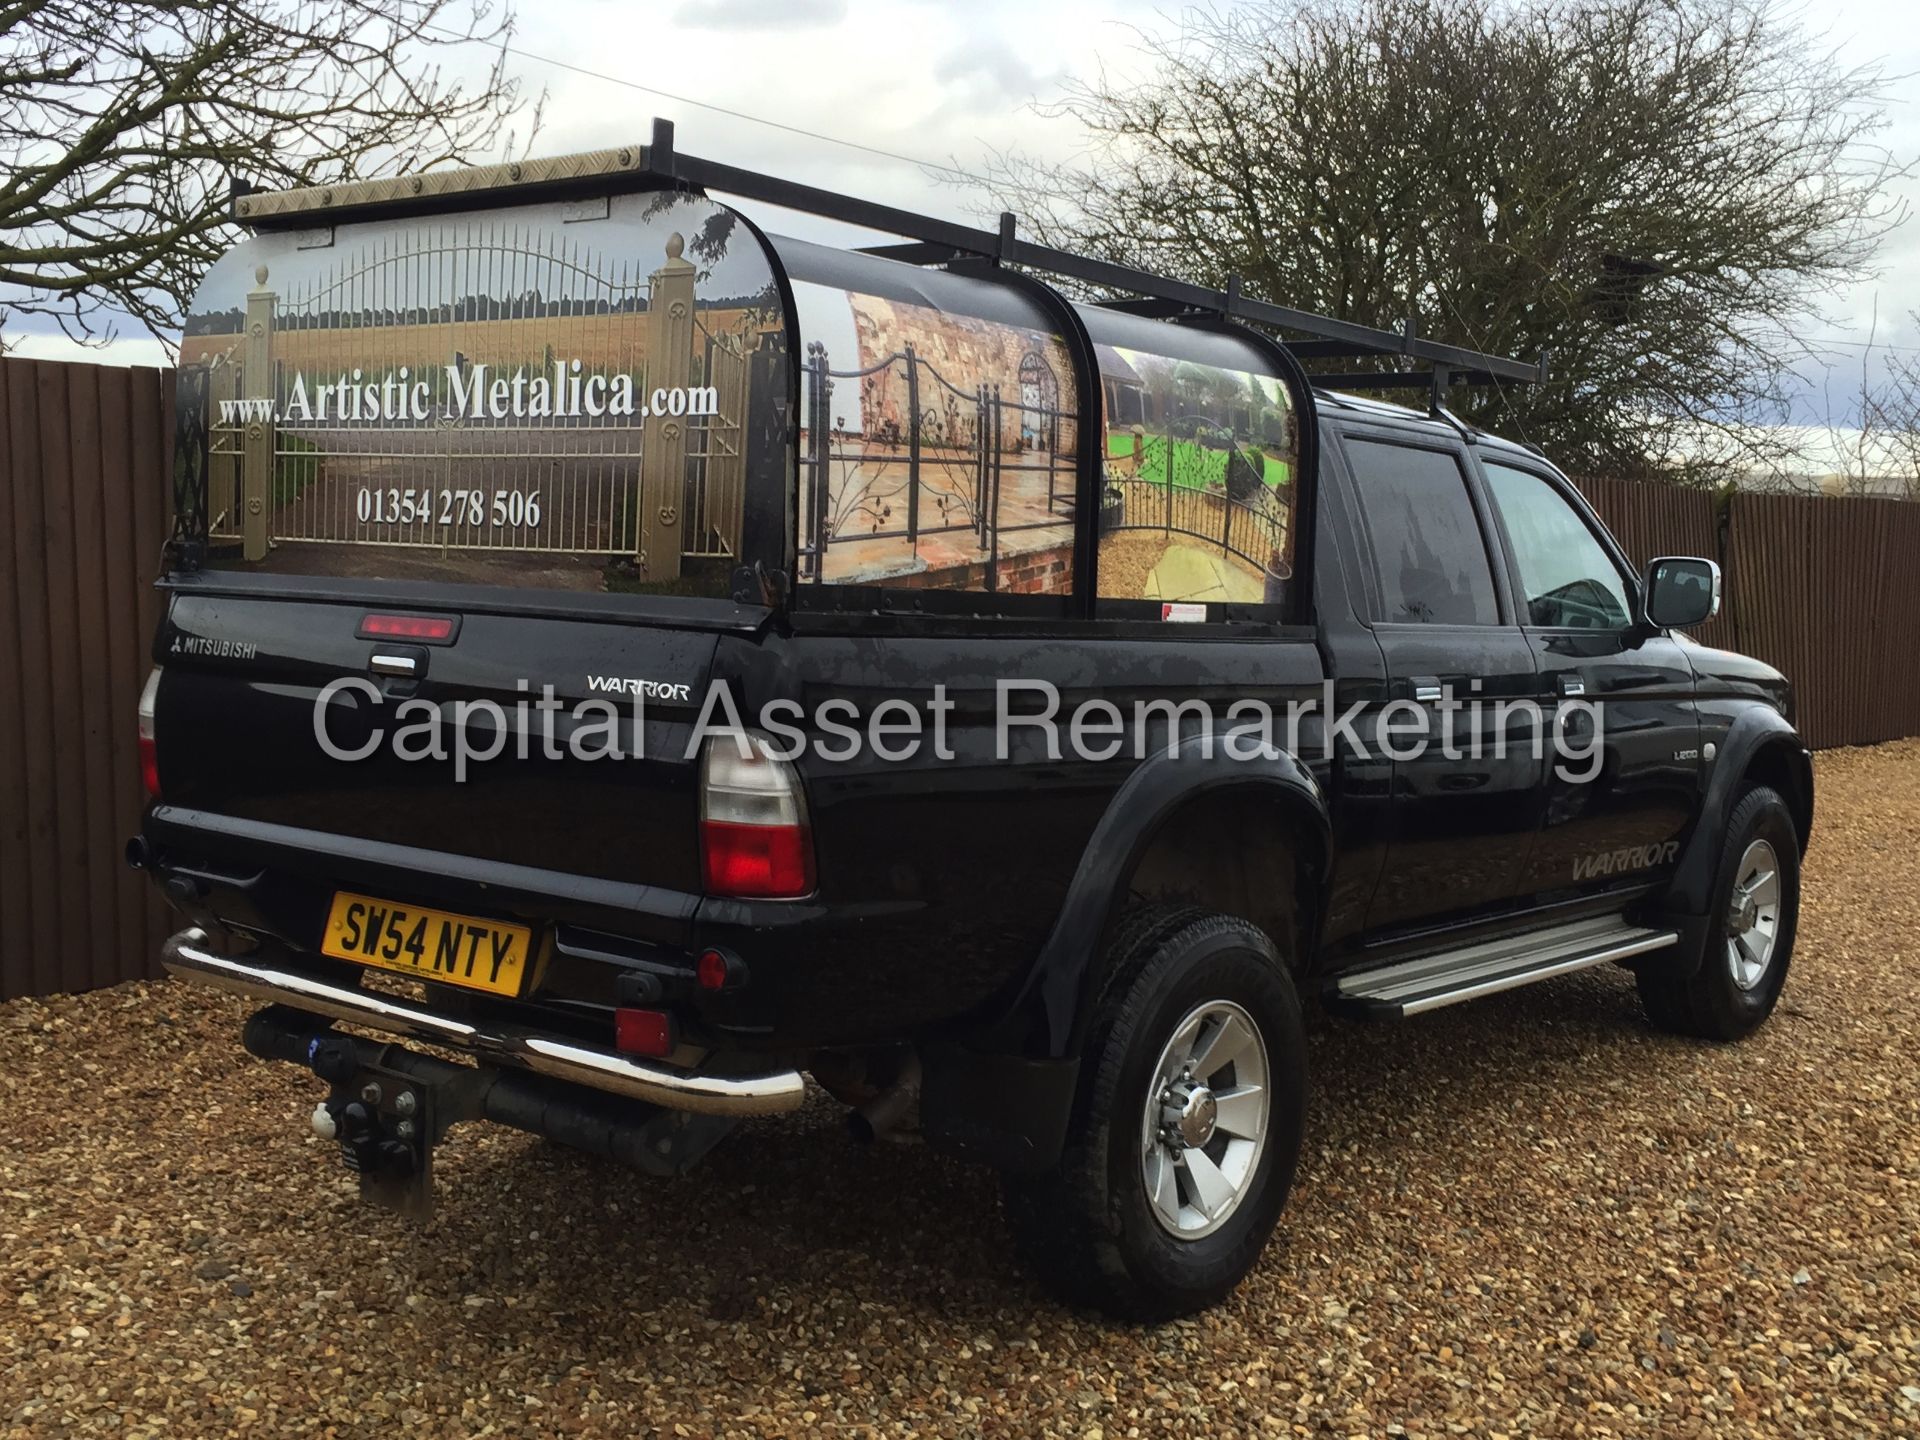 (ON SALE) MITSUBISHI L200 'WARRIOR' (2005) DOUBLE CAB PICK-UP 'AIR CON' (NO VAT - SAVE 20%) - Image 6 of 20